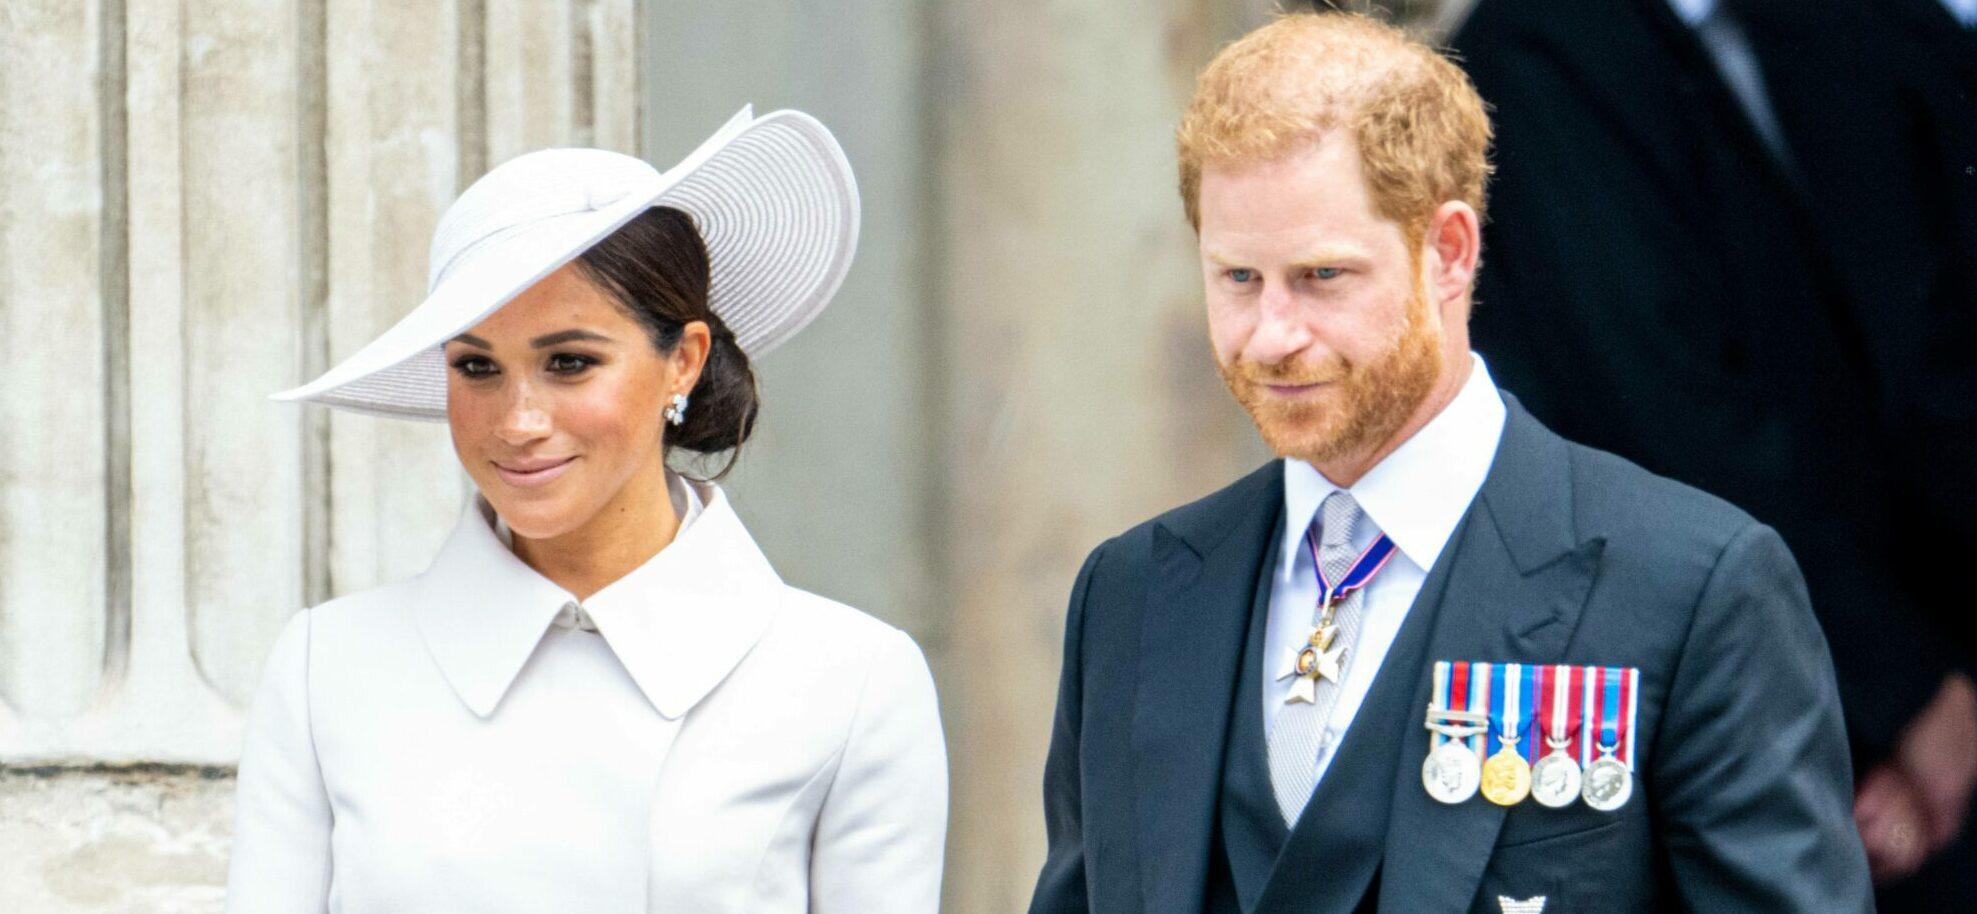 Prince Harry’s Grandfather Allegedly Called Meghan Markle This Spiteful Nickname